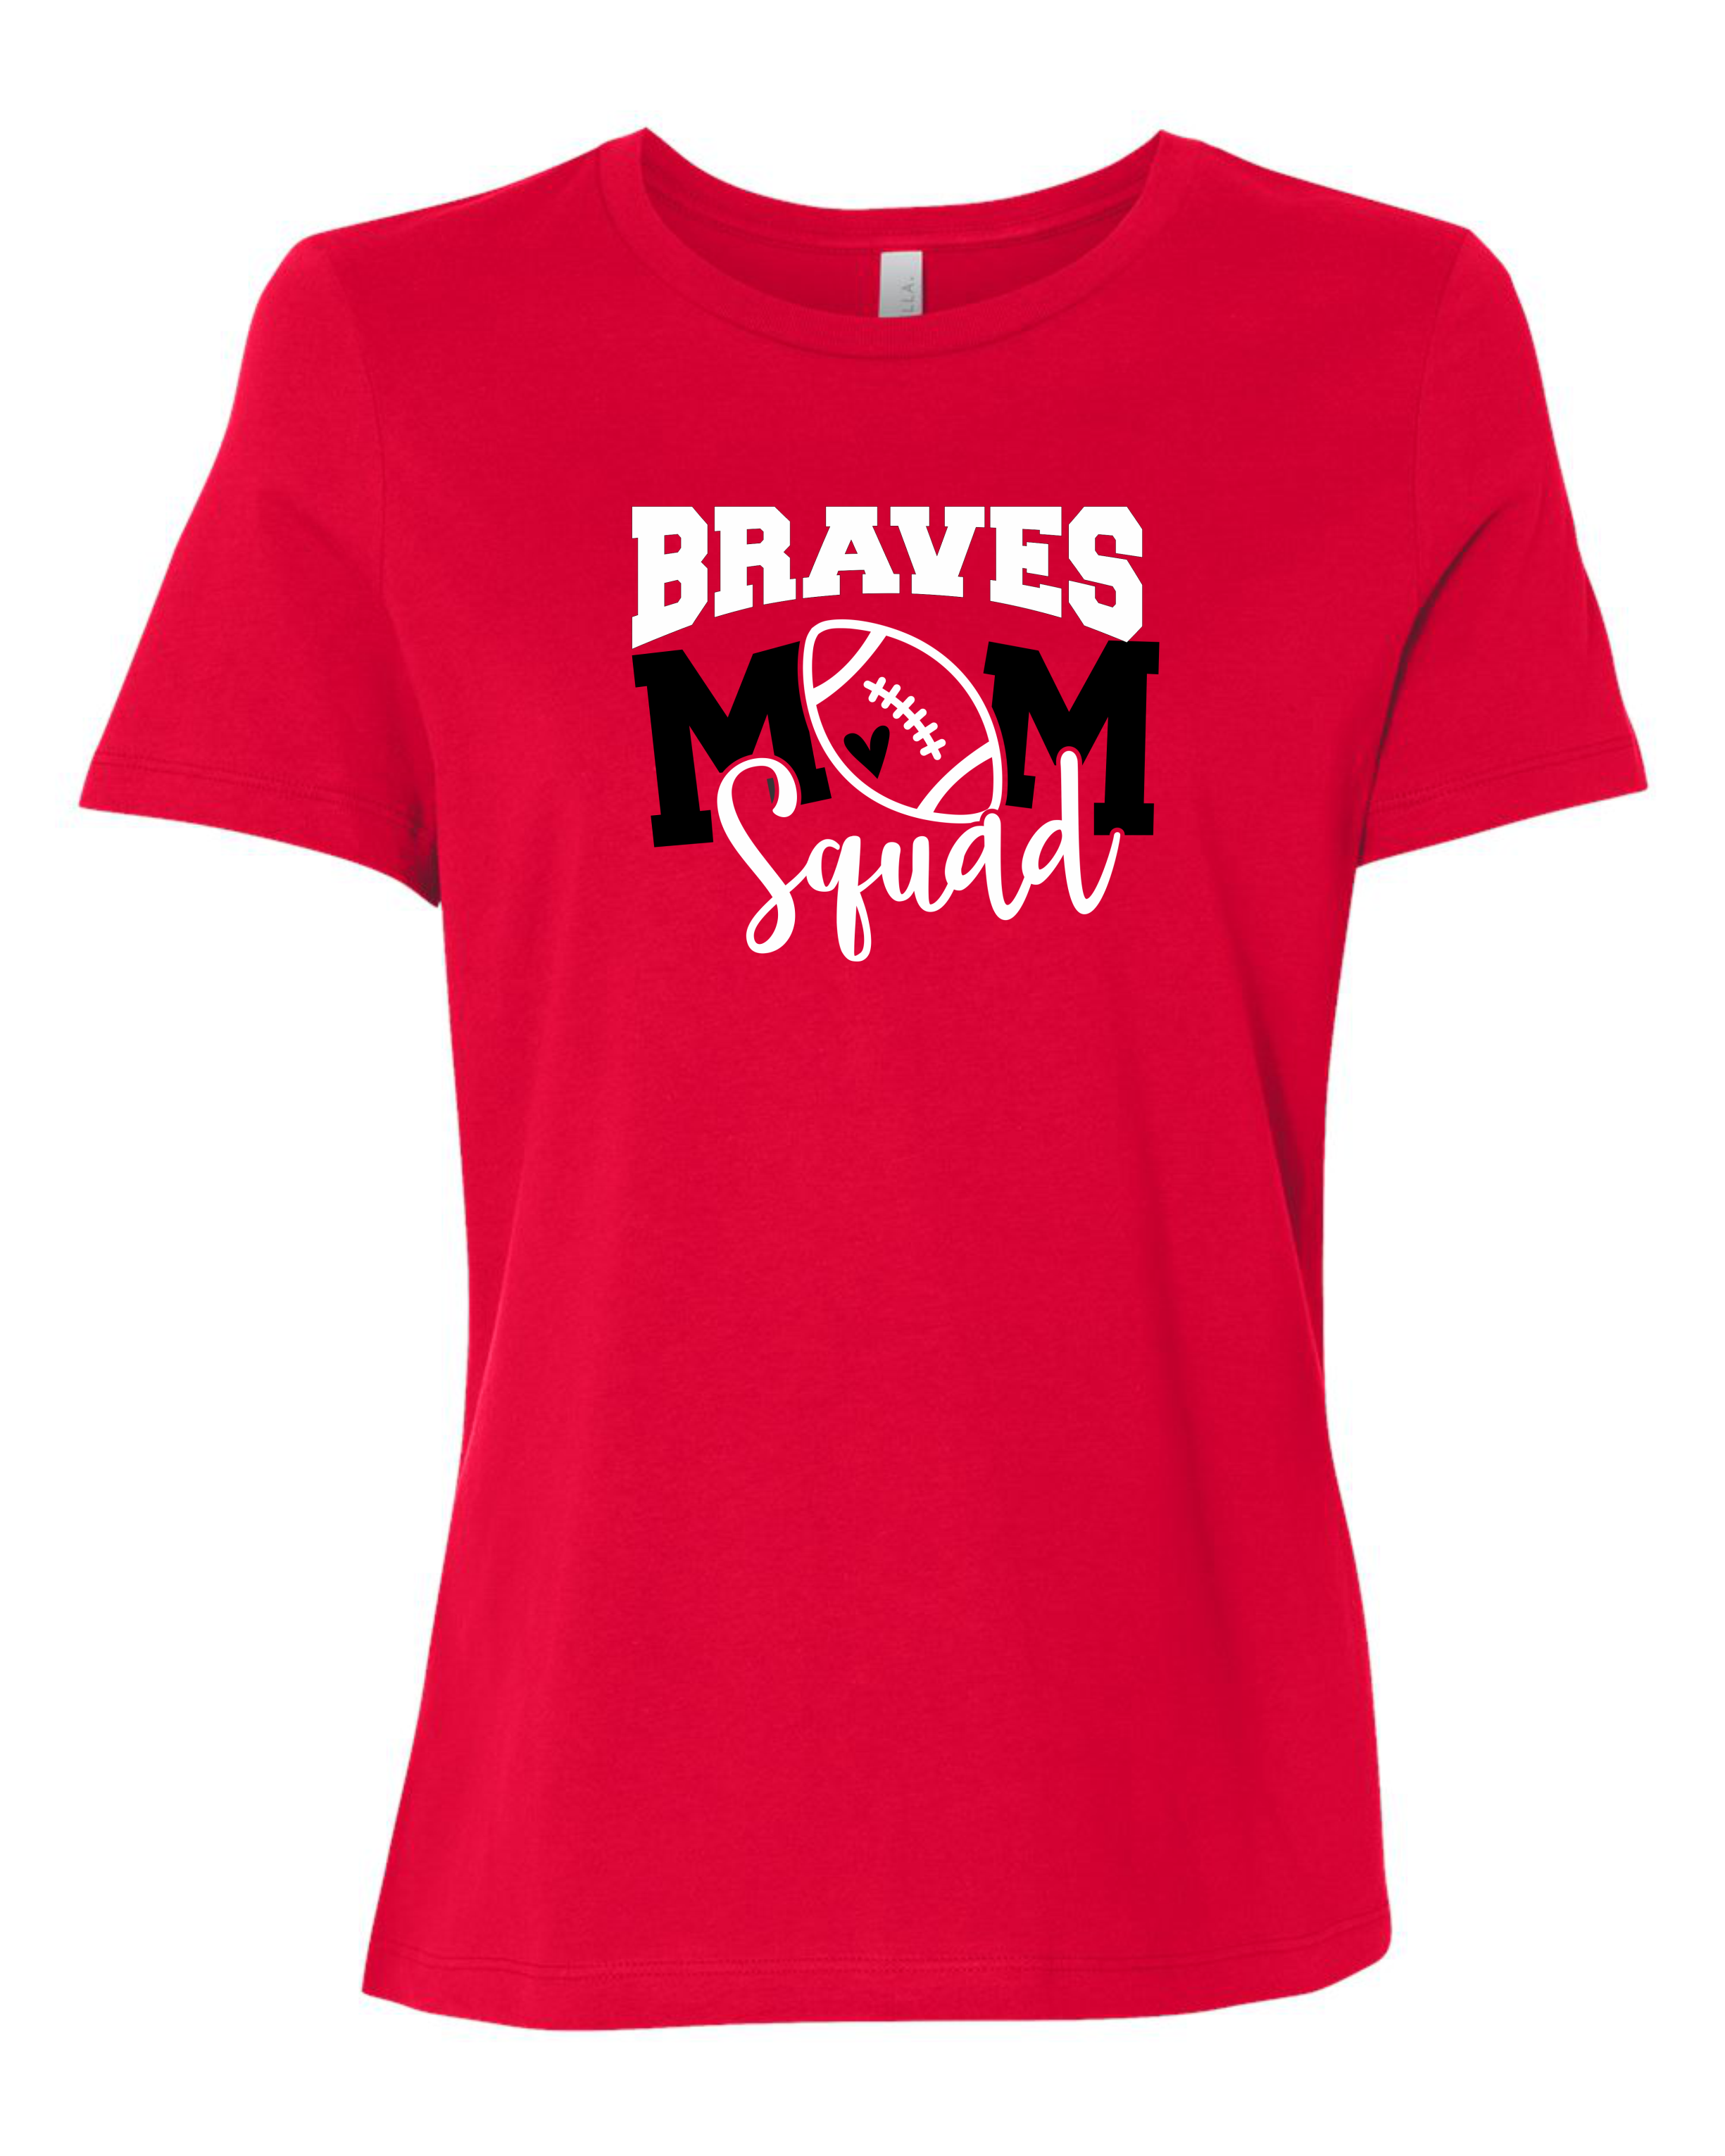 Mechanicsville Braves Women's Bella and Canvas Short Sleeve Relaxed Fit Round Neck-FOOTBALL MOM SQUAD